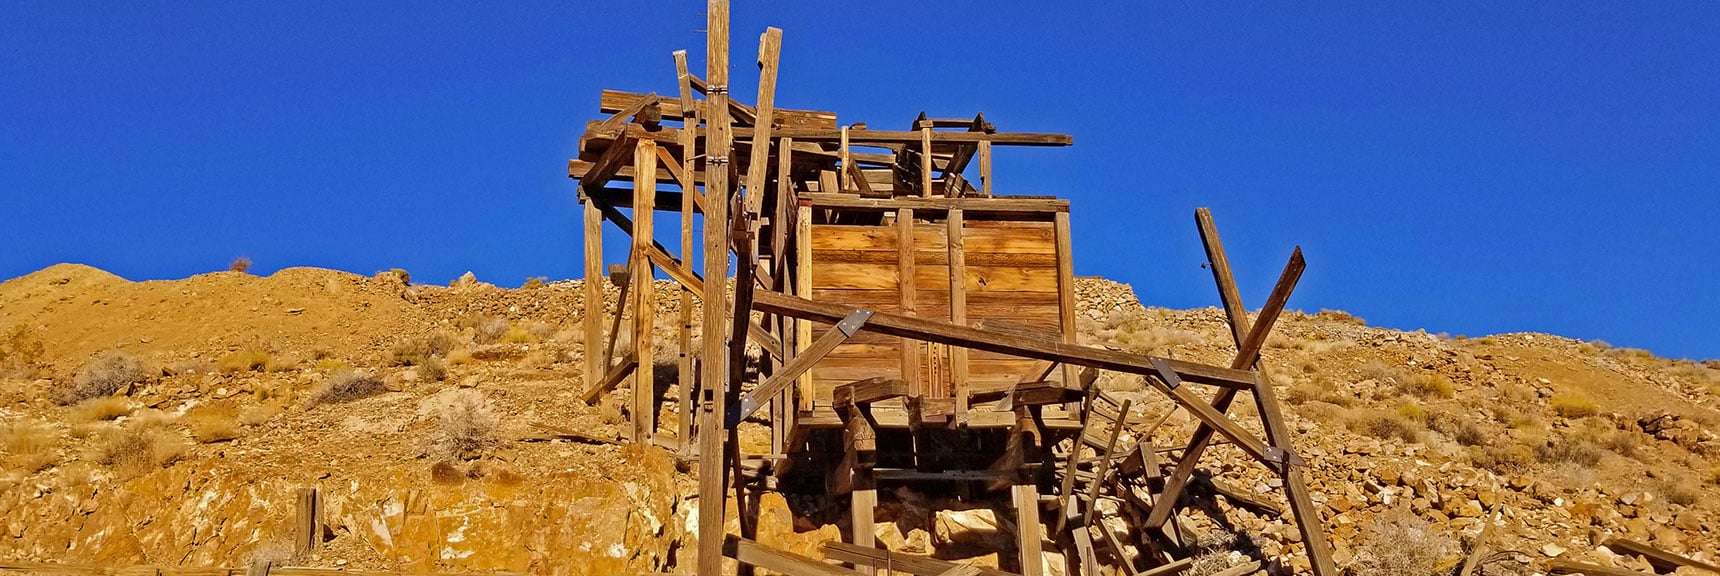 Bottom View of Cashier Mill. Ore Crushed as it Traveled Down the Chute | Eureka Mine, Harrisburg, Cashier Mill, Death Valley, California